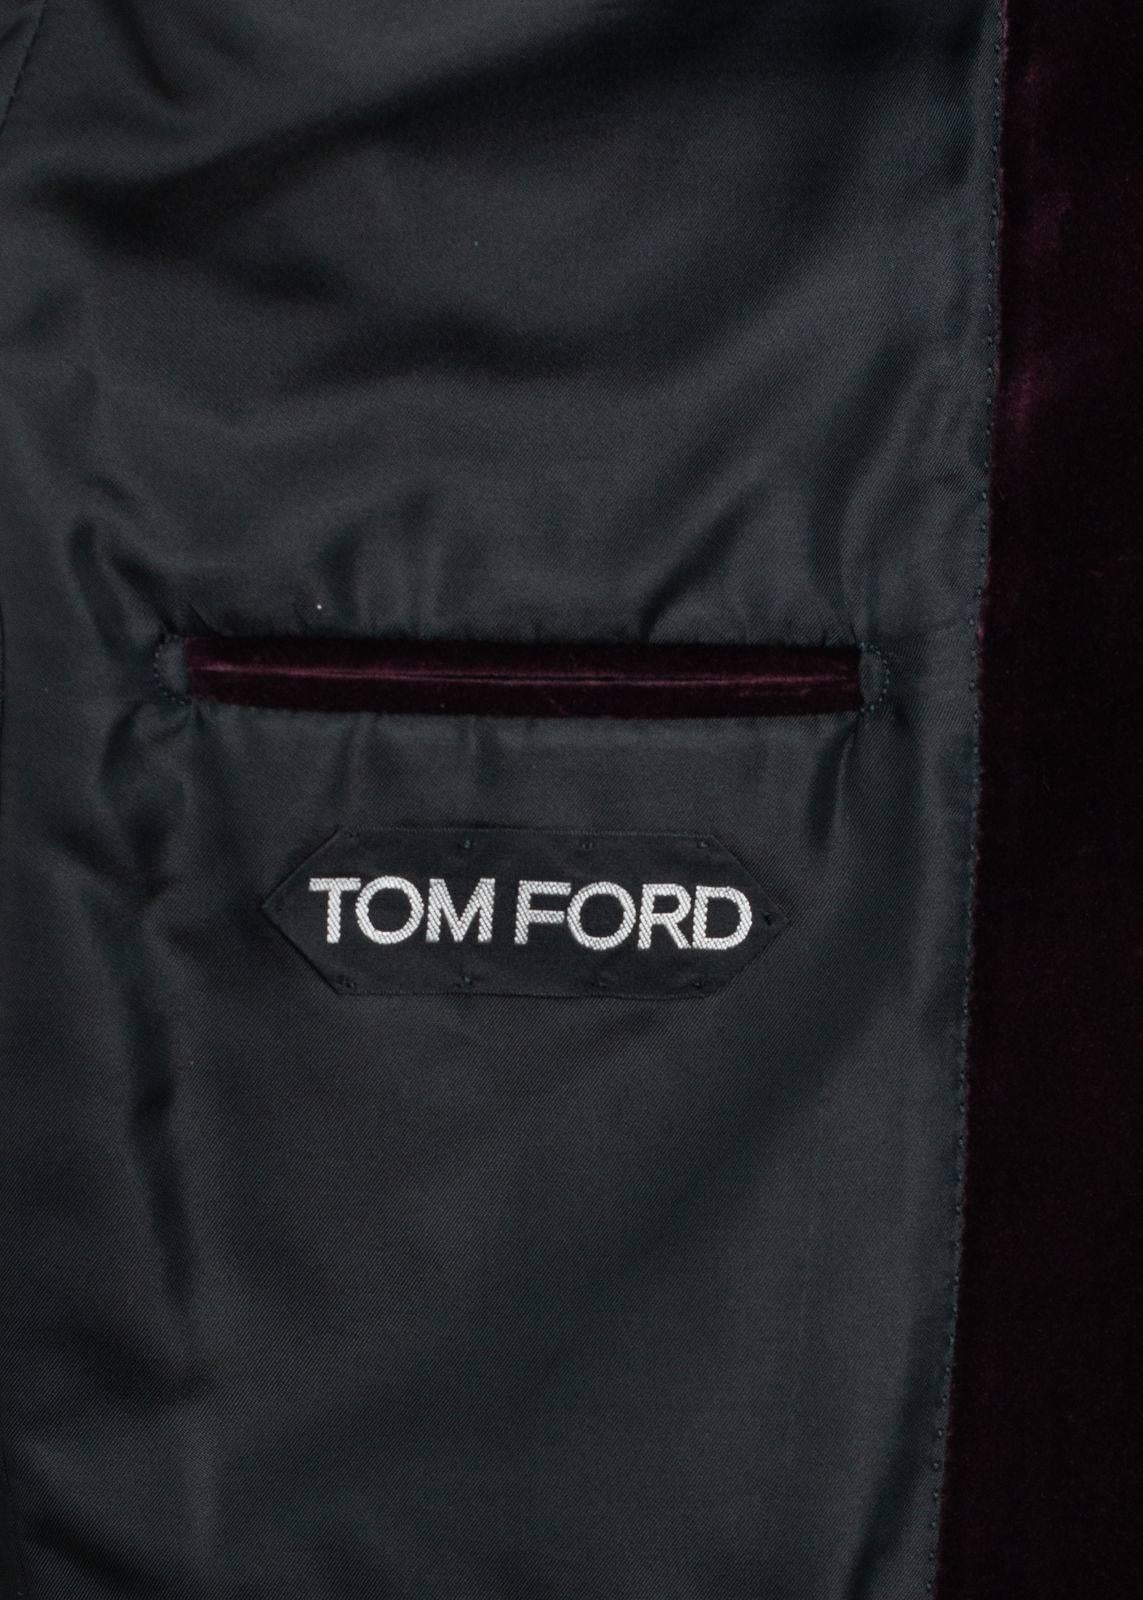 Set the tone of the evening  in with your Tom Ford Velvet Jacket. This richly smooth Shelton features a notch lapel, silk blended interior, and unfinished hem jacket sleeves. You can pair this suave unit with and all white ensemble for maximum